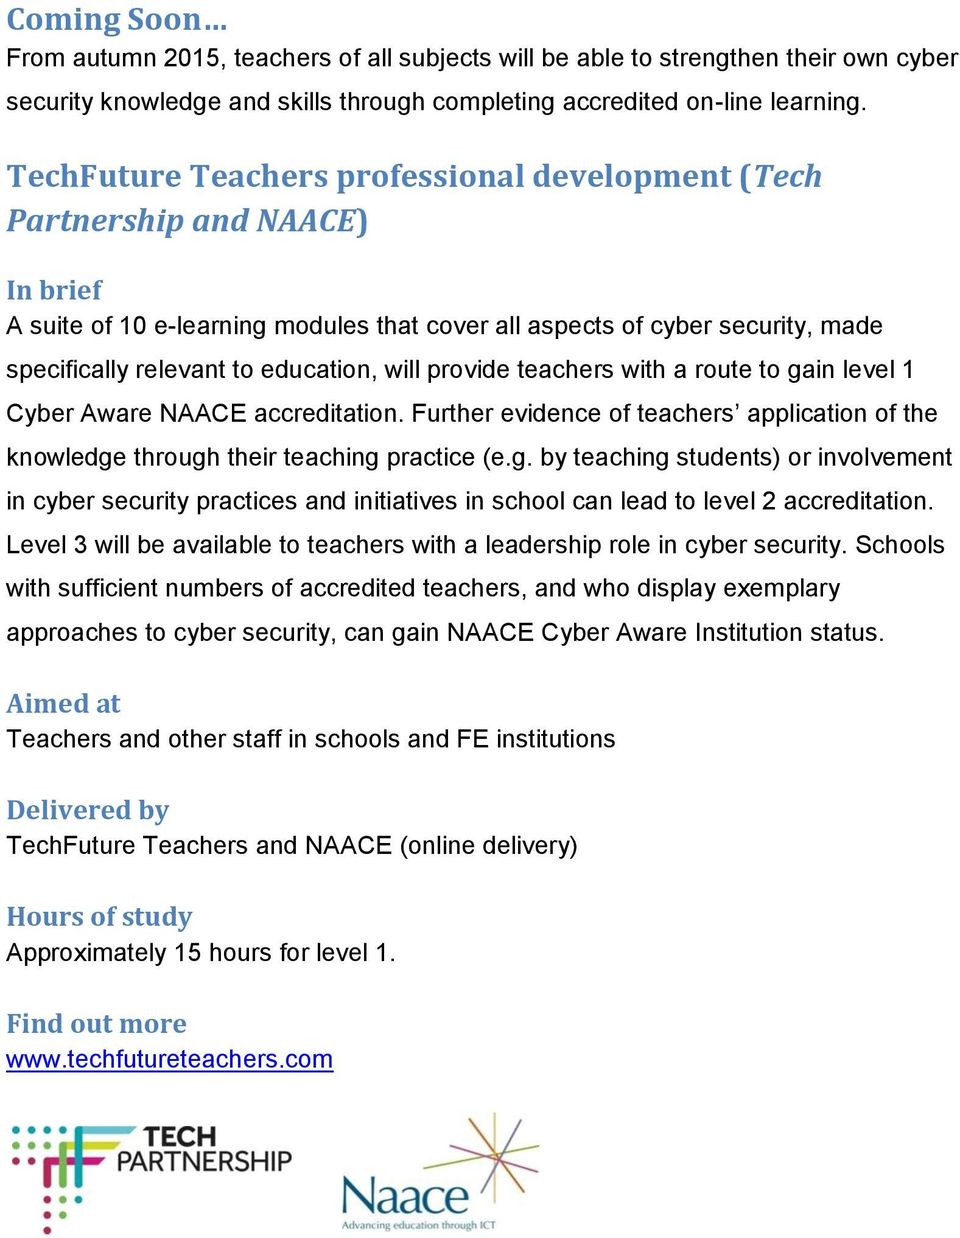 provide teachers with a route to gain level 1 Cyber Aware NAACE accreditation. Further evidence of teachers application of the knowledge through their teaching practice (e.g. by teaching students) or involvement in cyber security practices and initiatives in school can lead to level 2 accreditation.